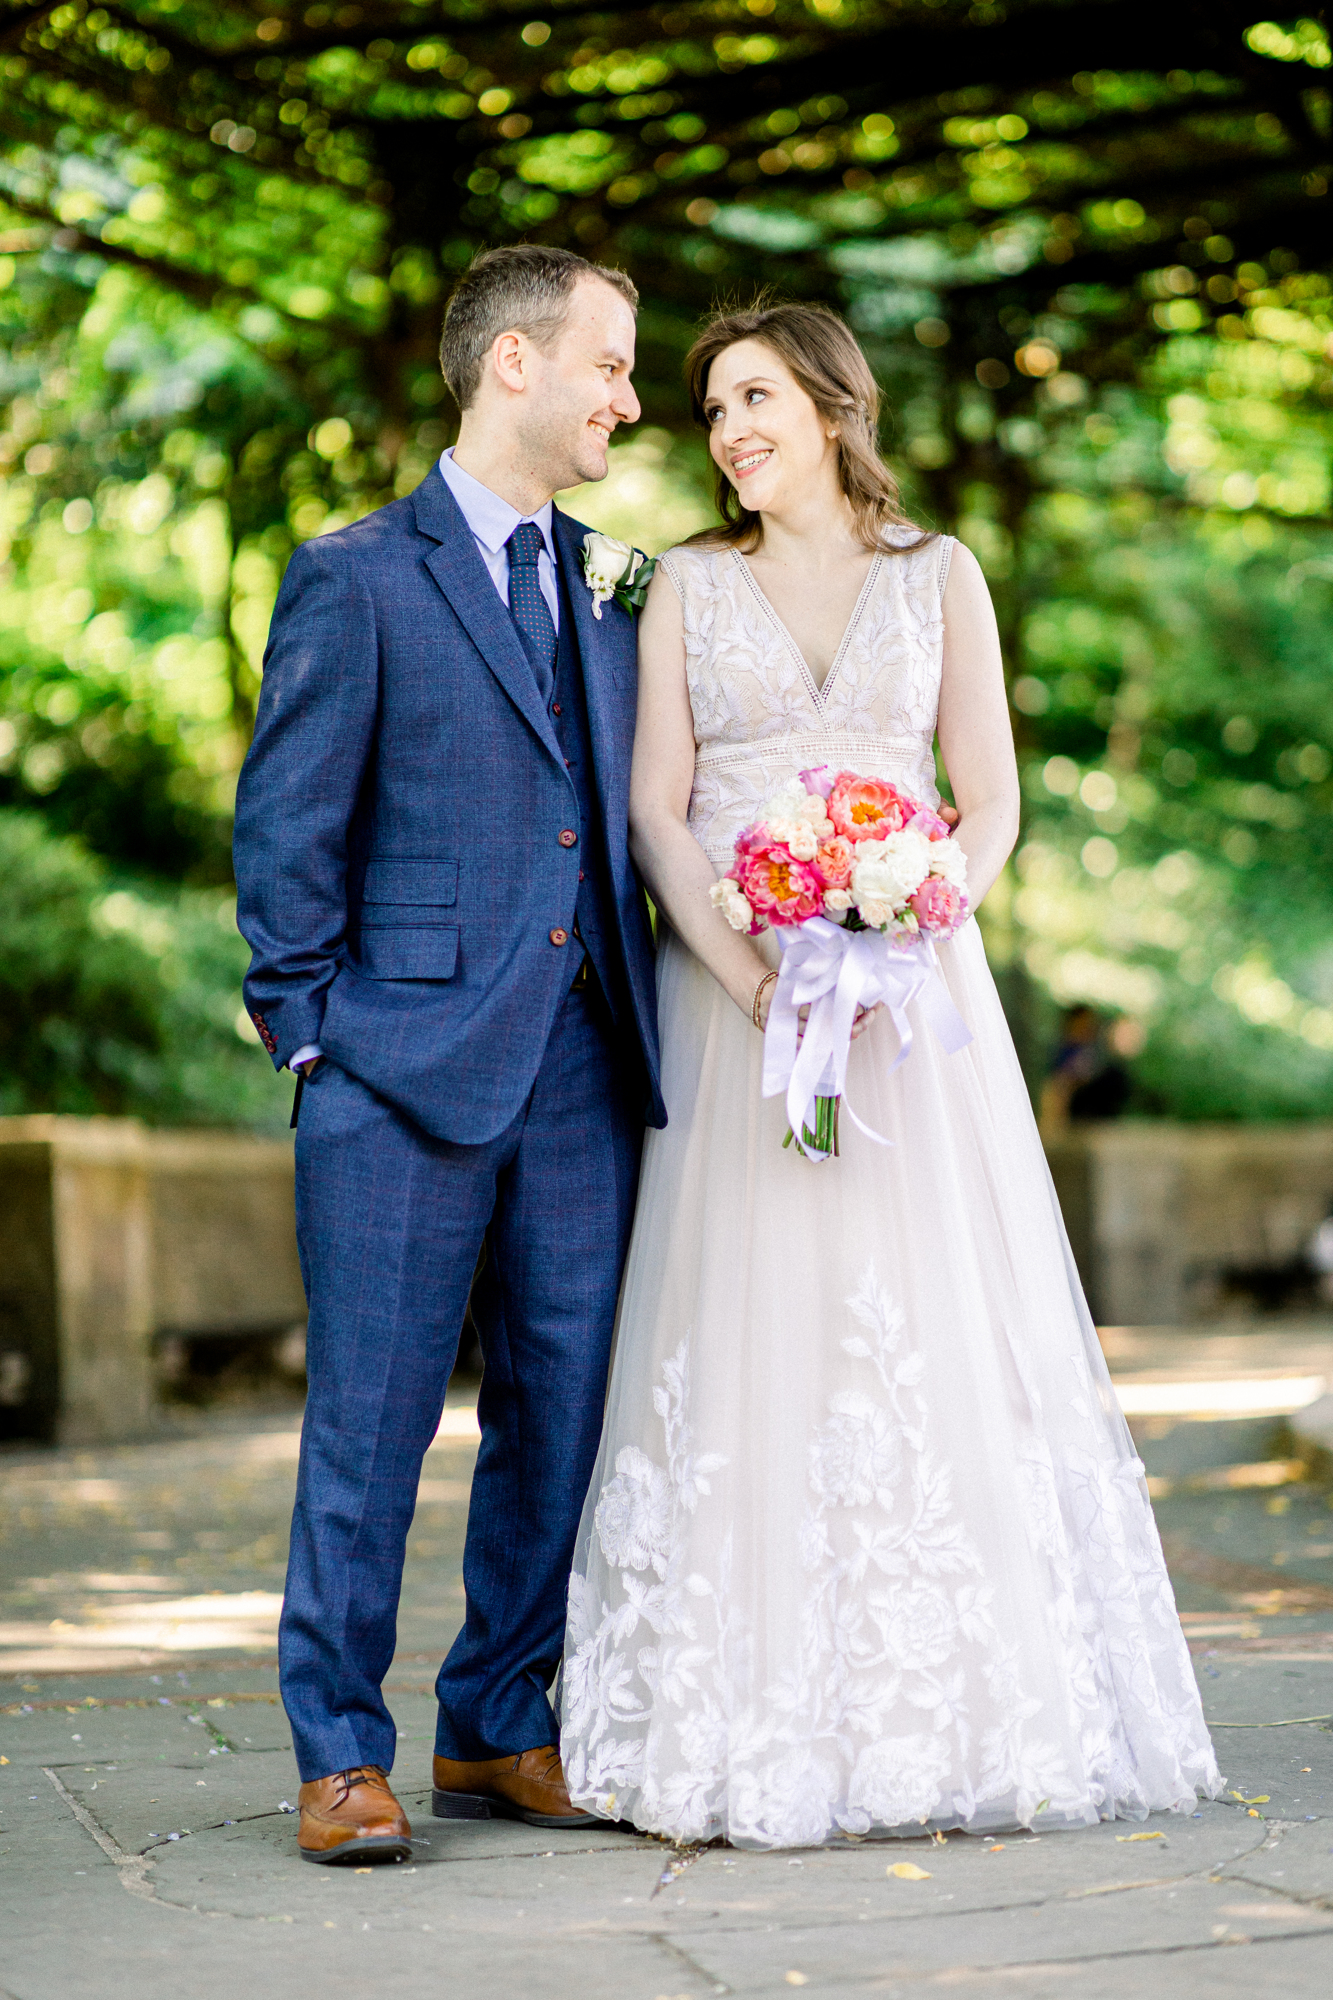 Candid Summer Wedding Photos at the Conservatory Garden in Central Park New York